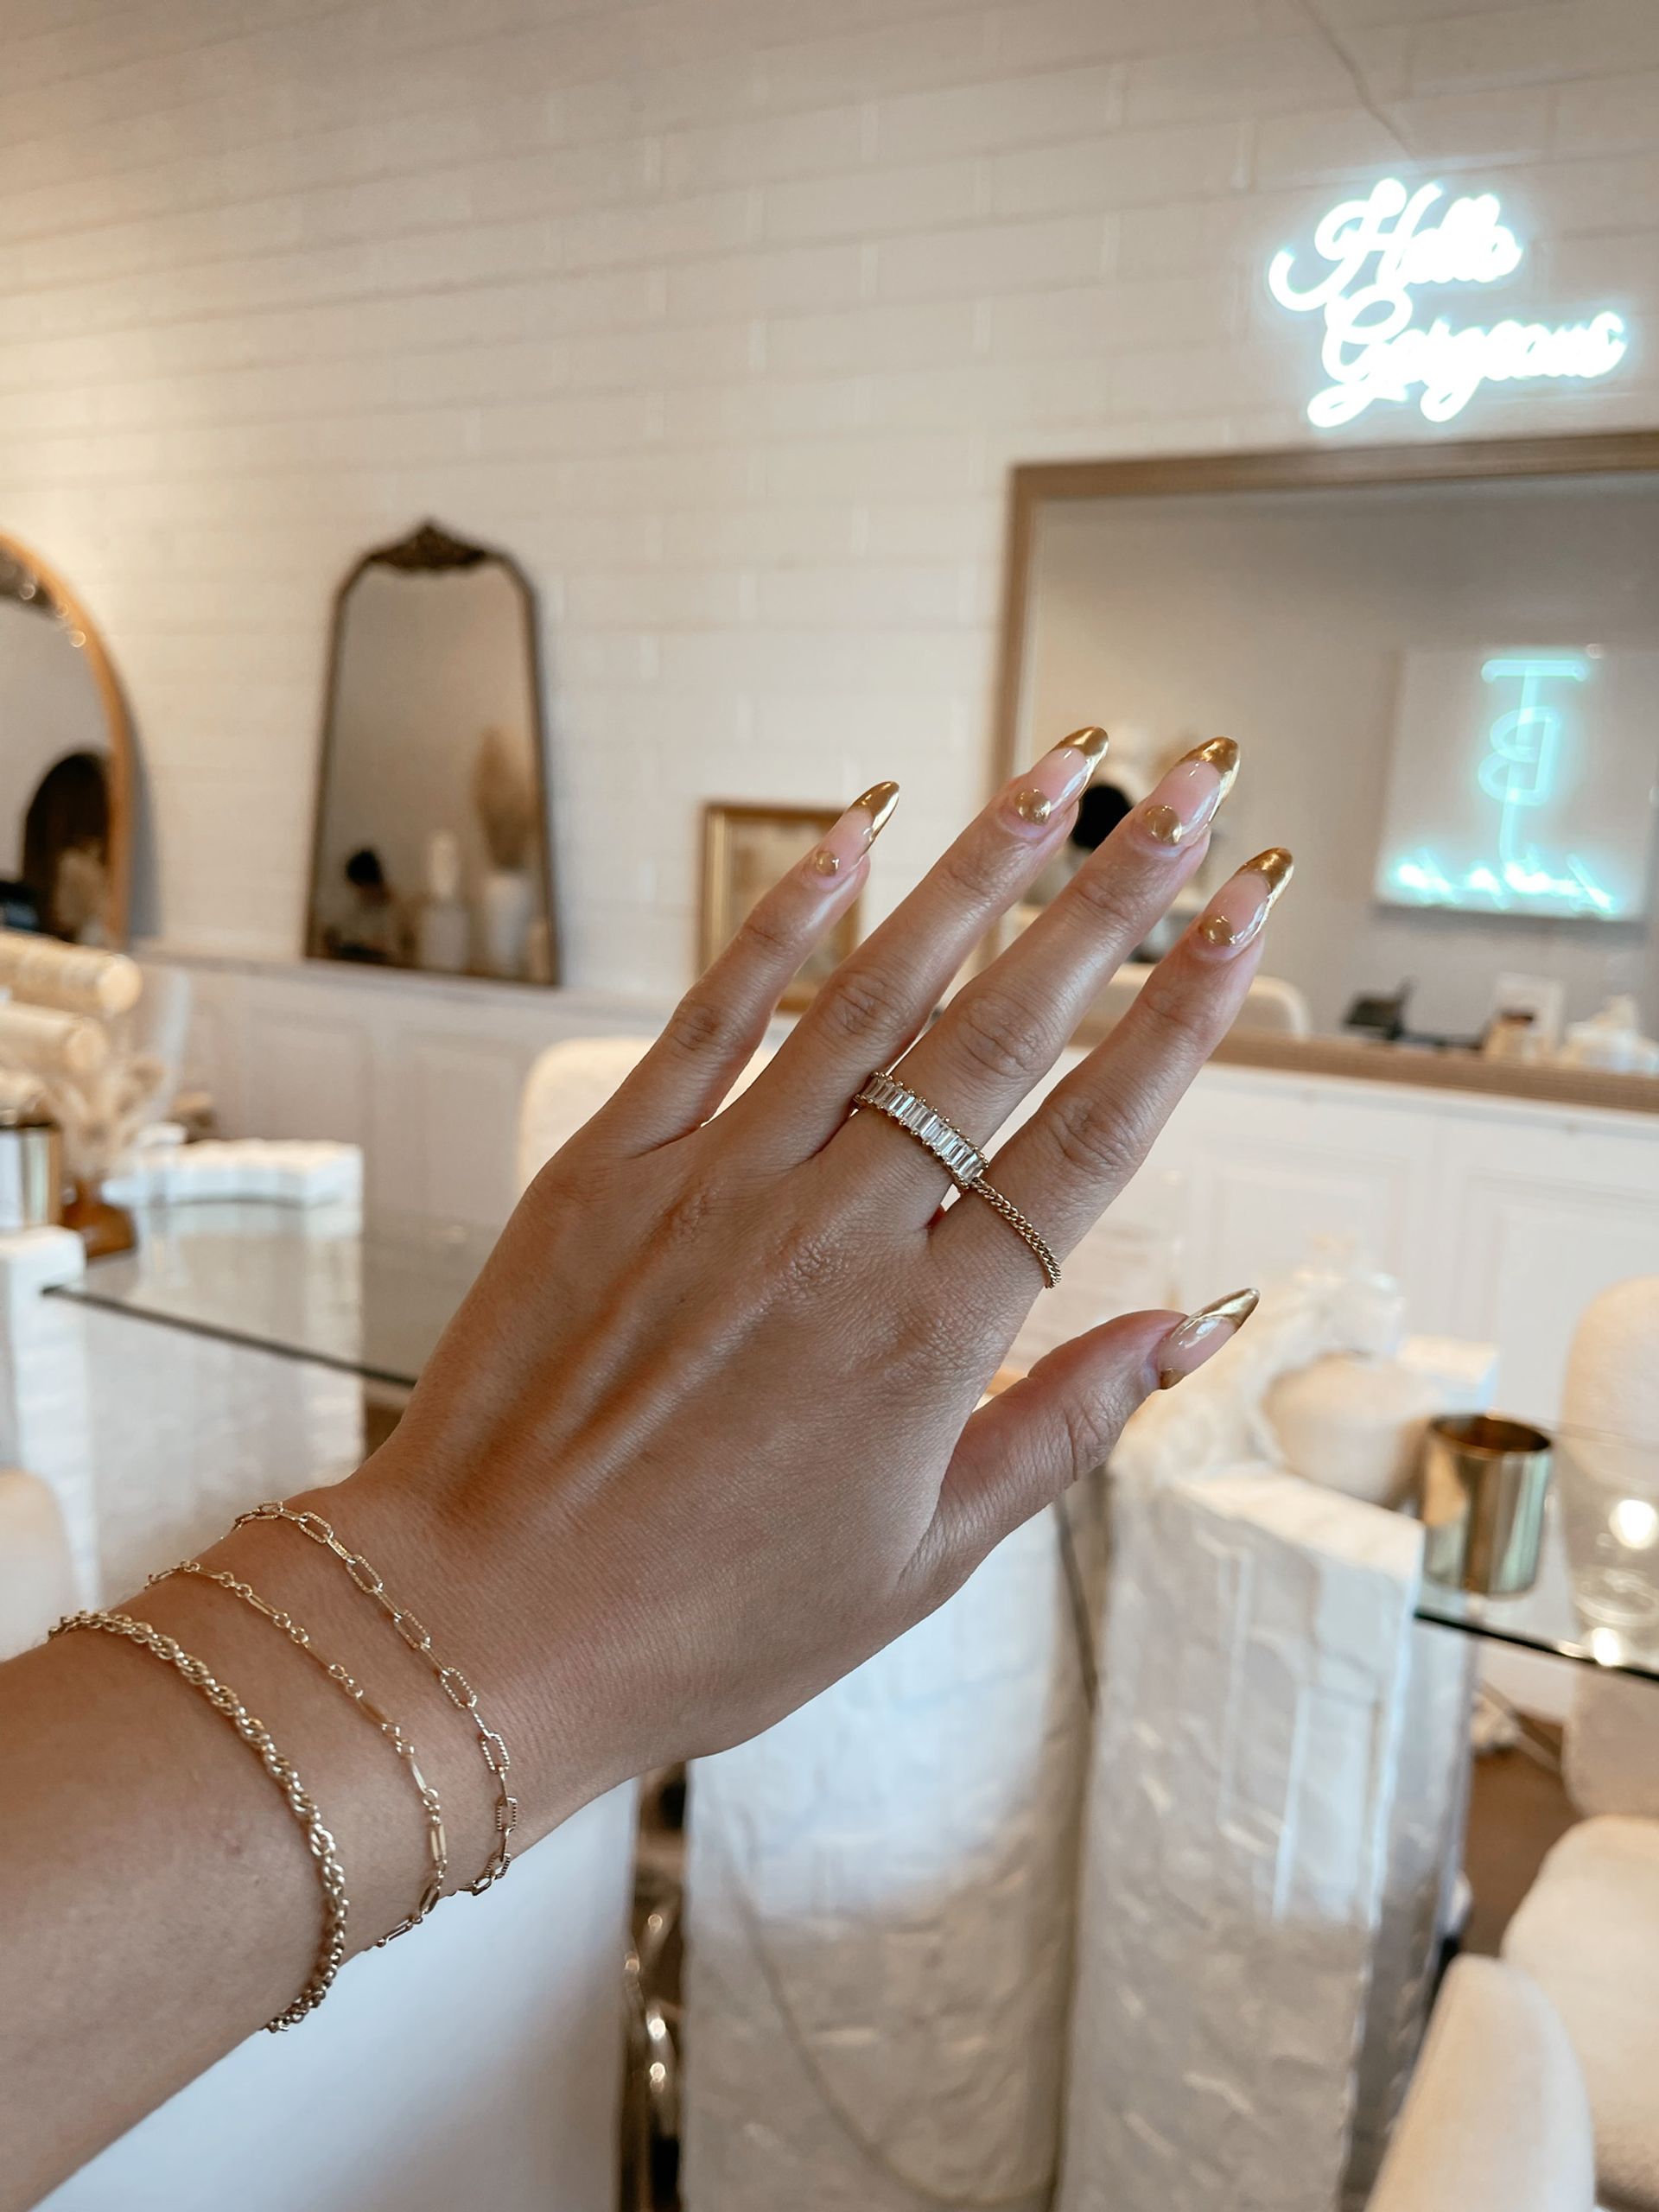 Linked For Life Permanent Jewelry Experience with Champagne & Free Gift image 2